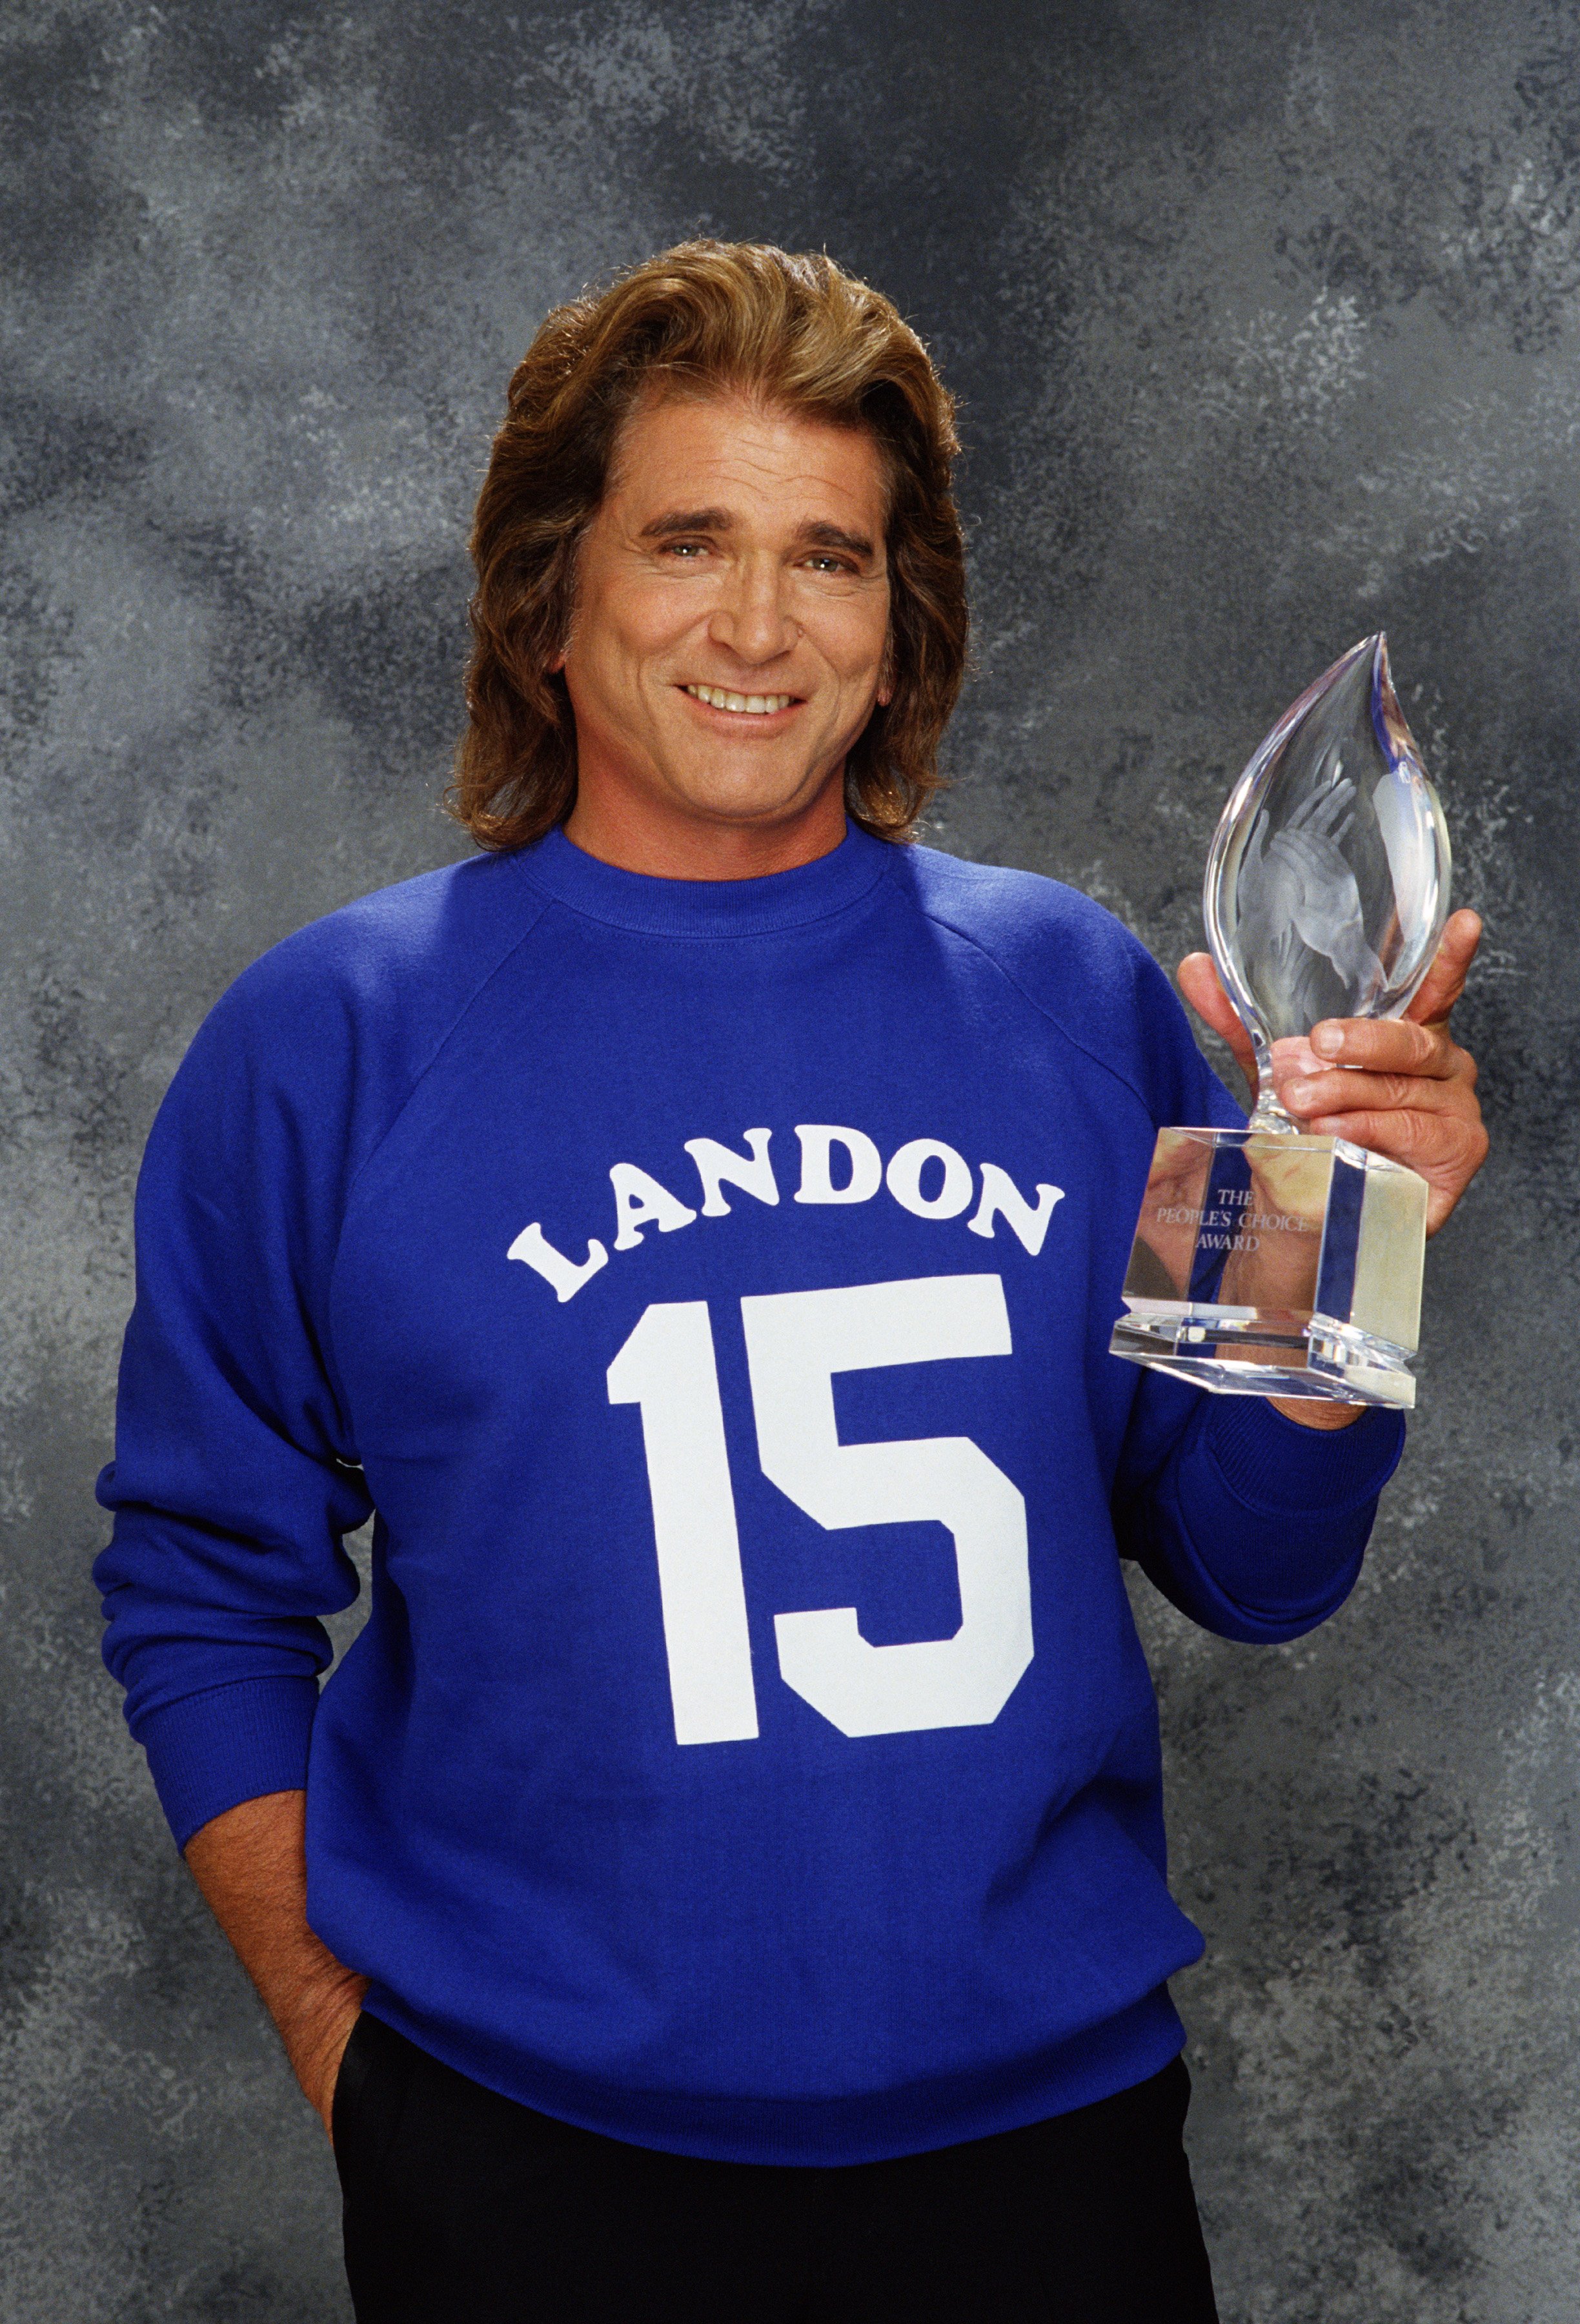 Michael Landon posing with a People's Choice Award in Beverly Hills, 1989. | Source: Getty Images